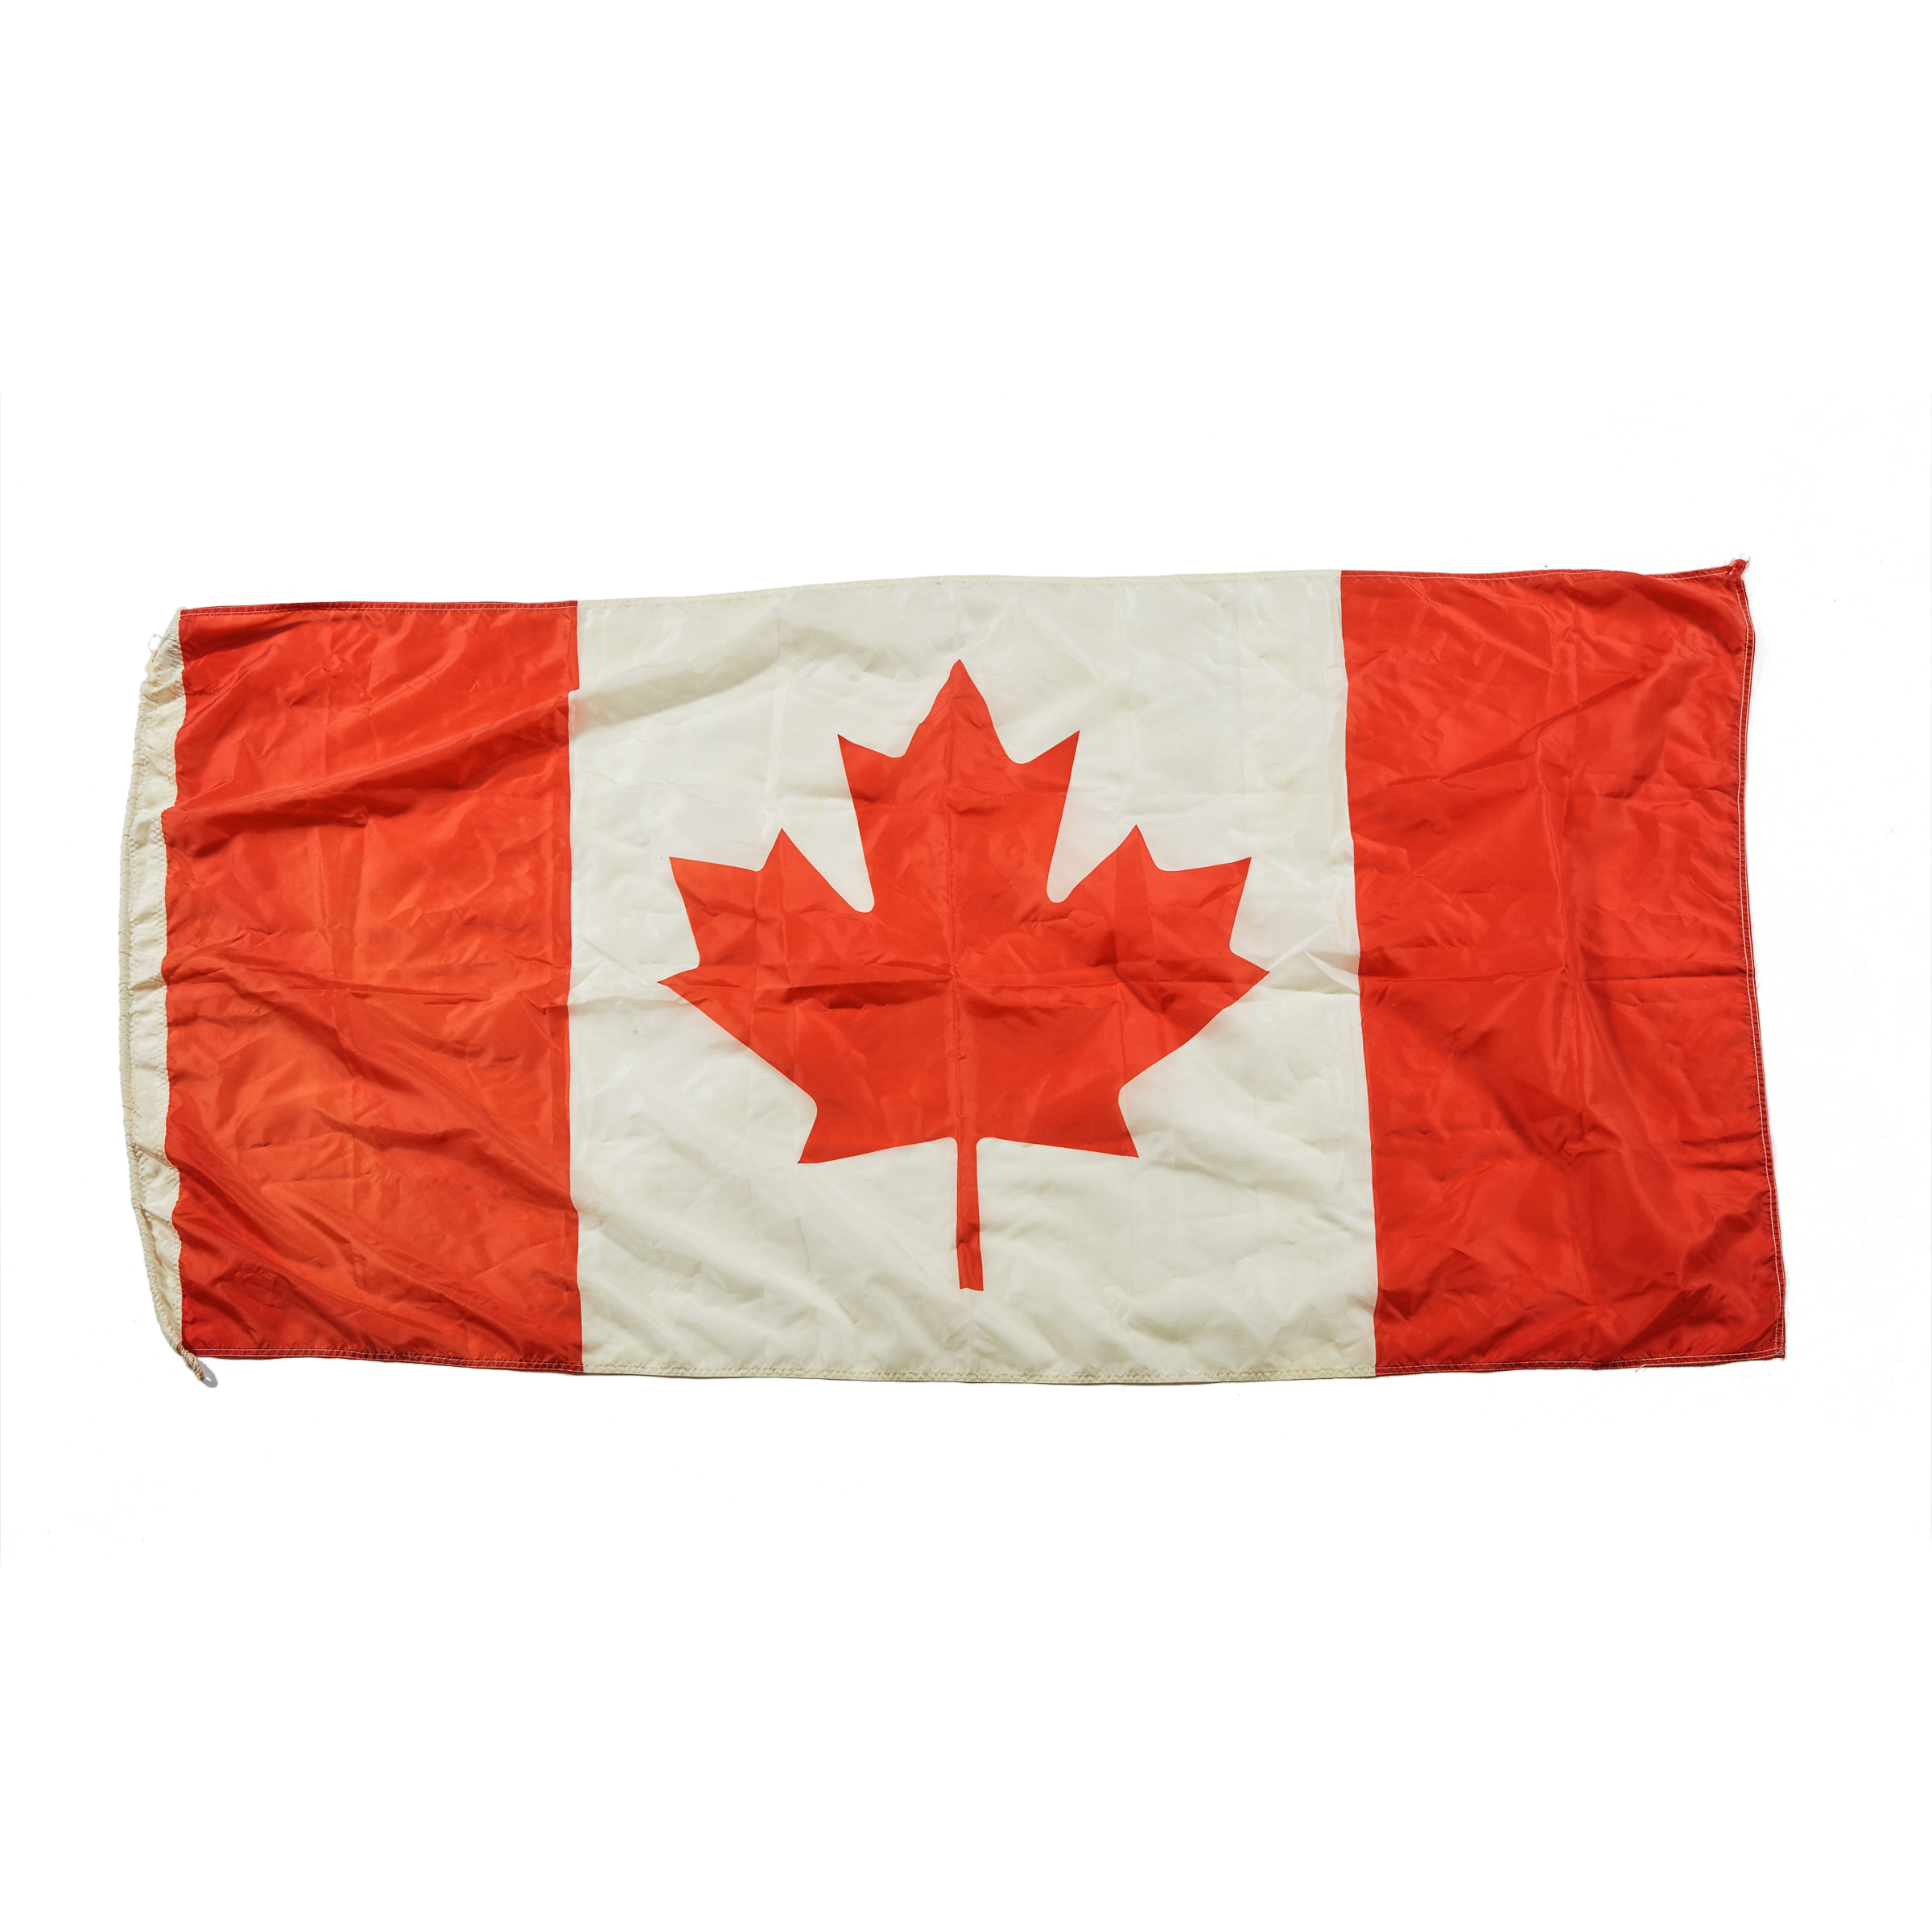 First Issue Canadian Maple Leaf Flag, John Leckie Ltd., Don Mills, Ontario, 1965